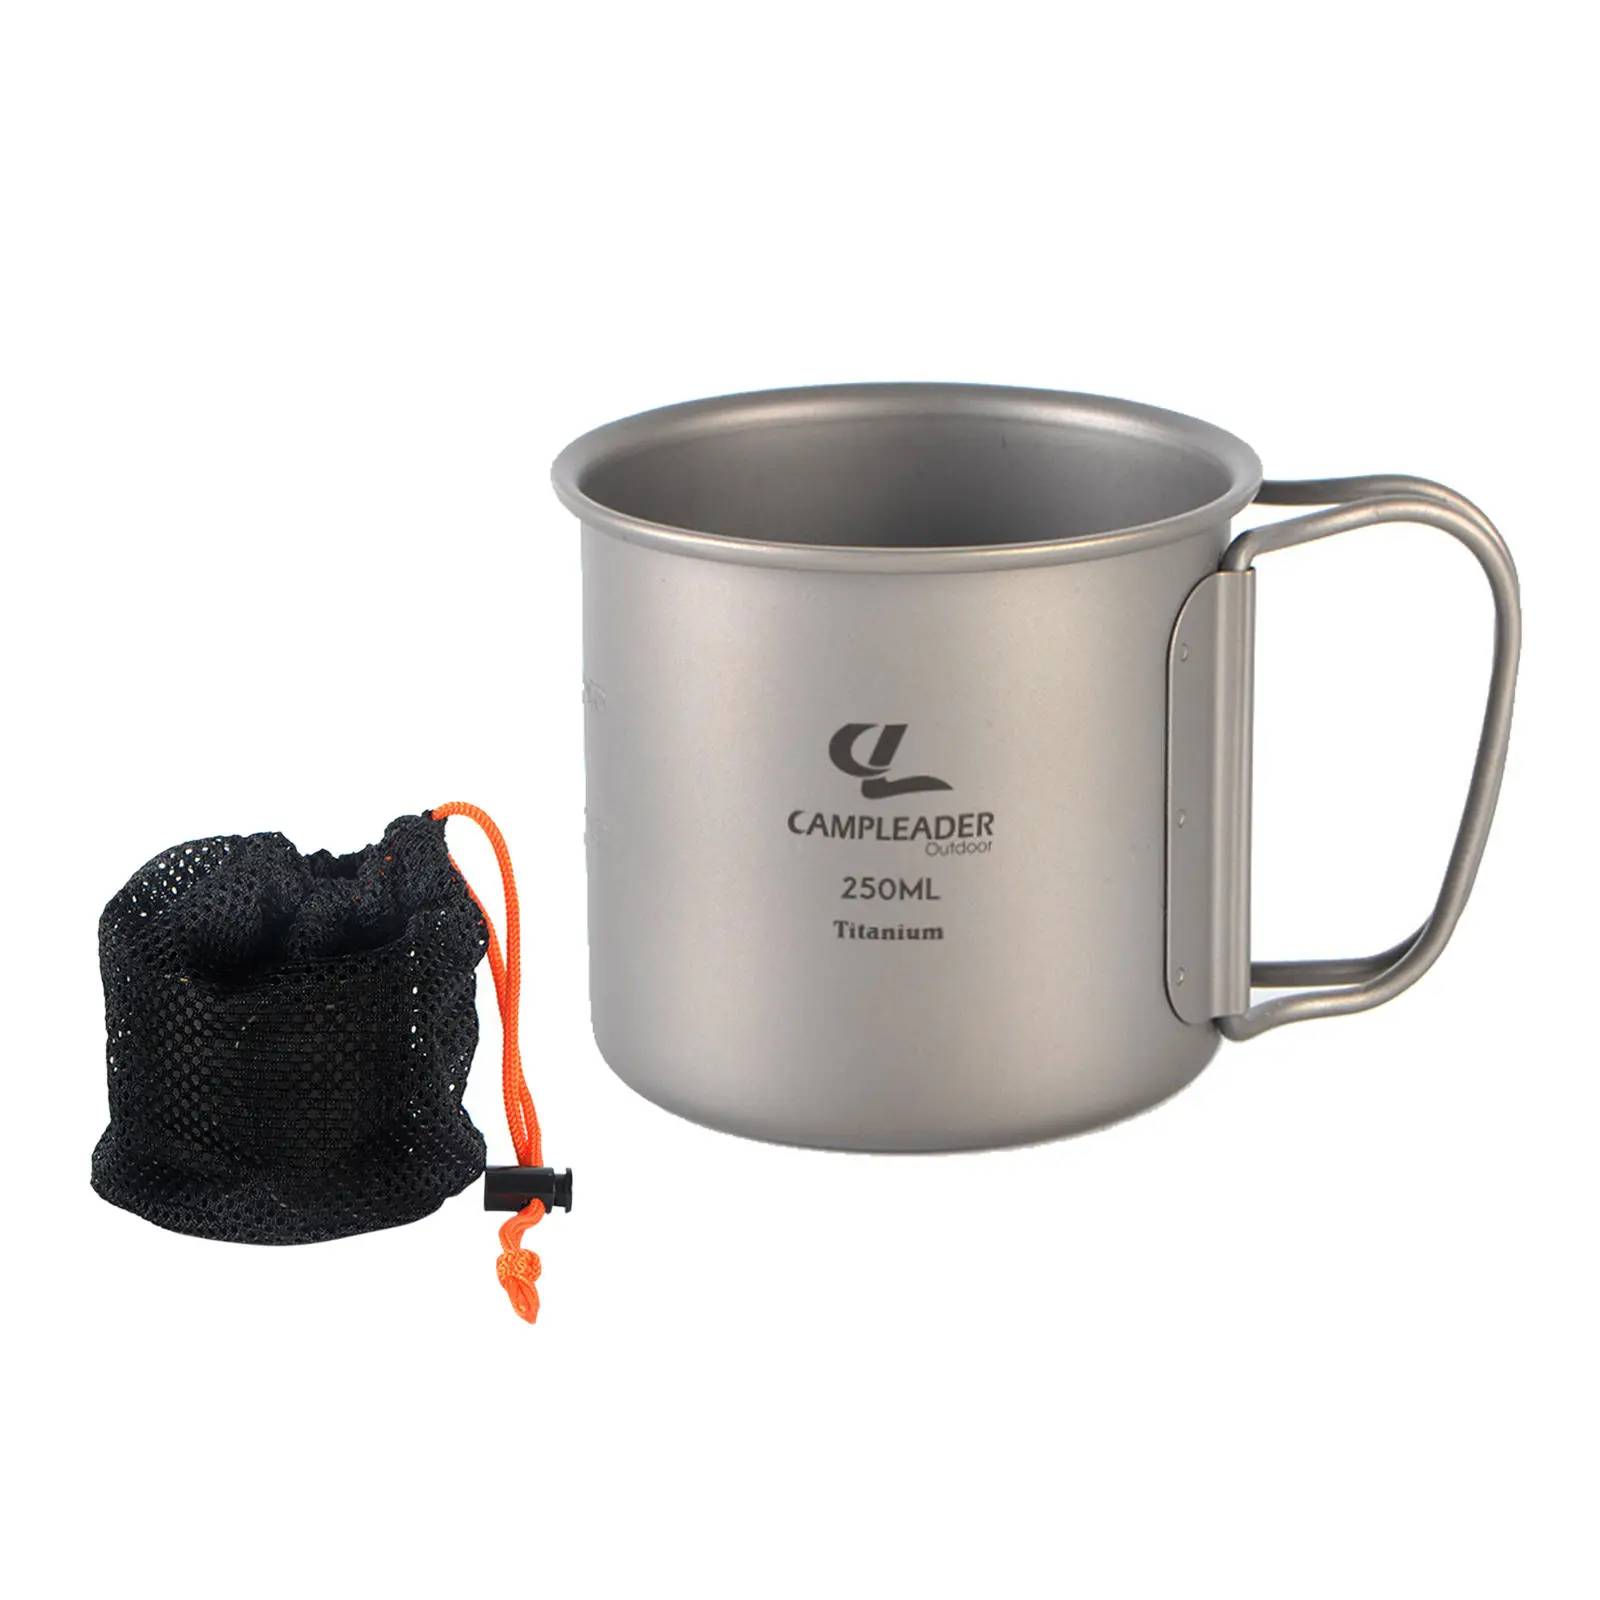 250ml Titanium Collapsible Camping Mug Hiking Water Cup Drinkware Only 40g